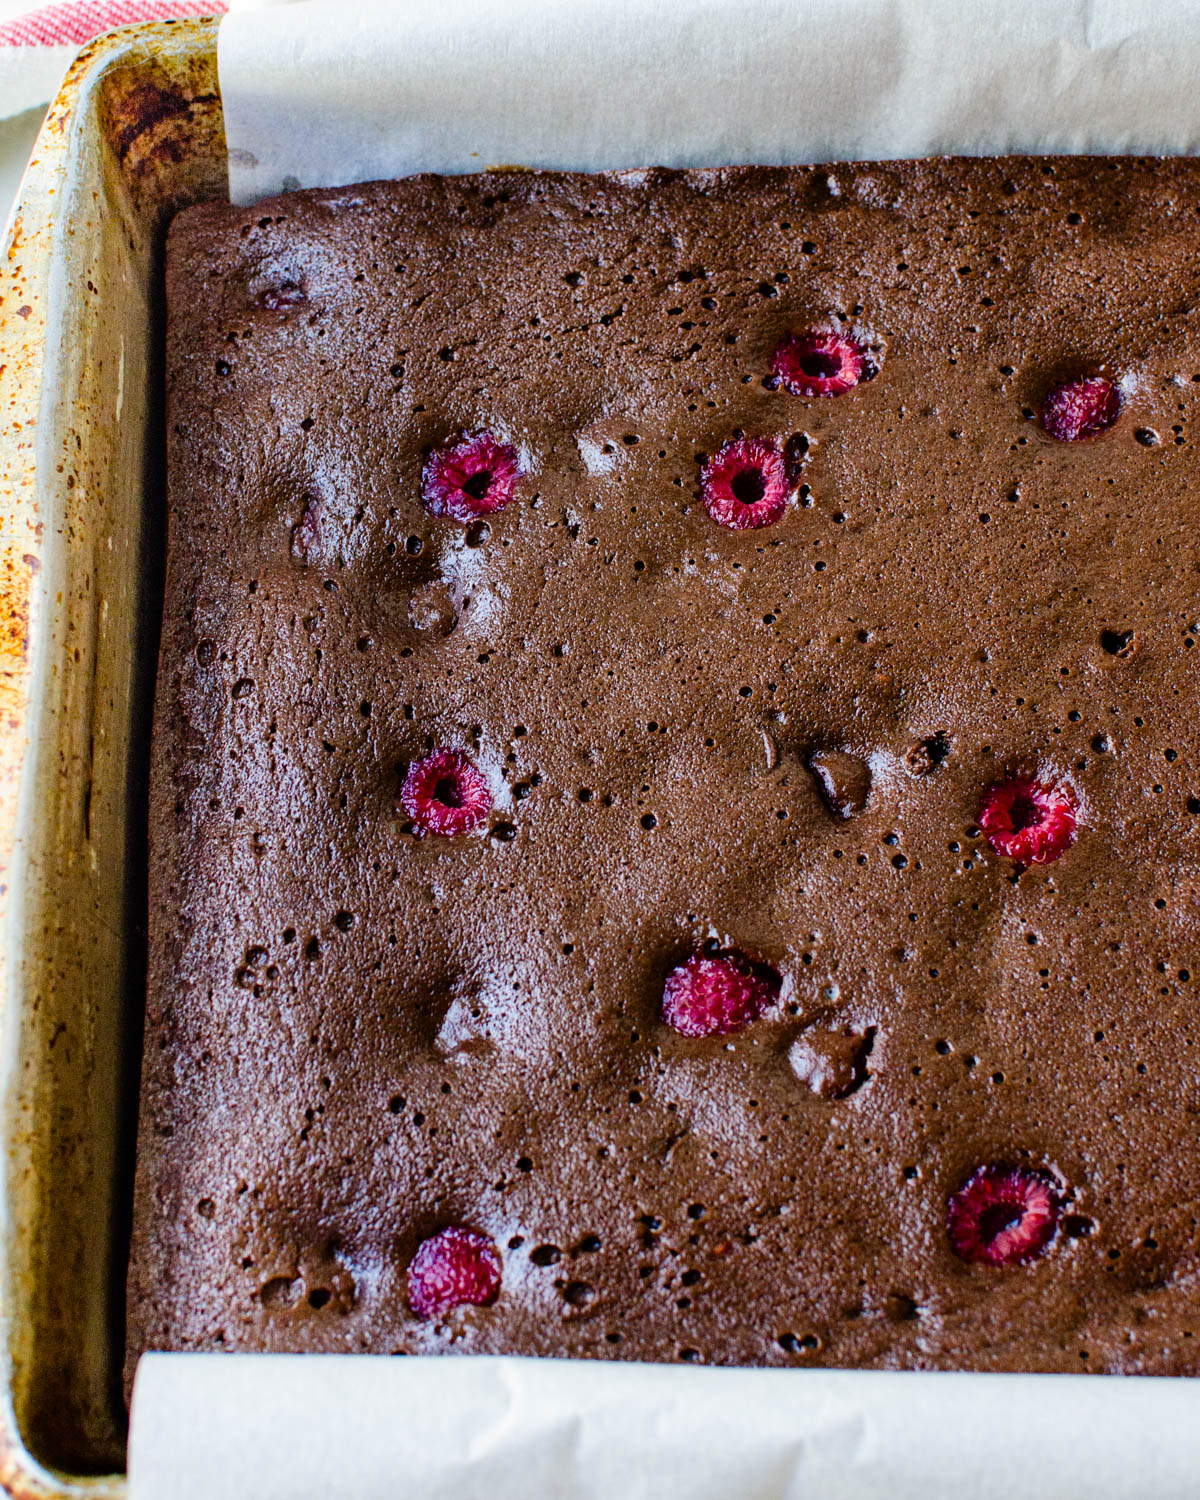 The raspberry brownies after baking.